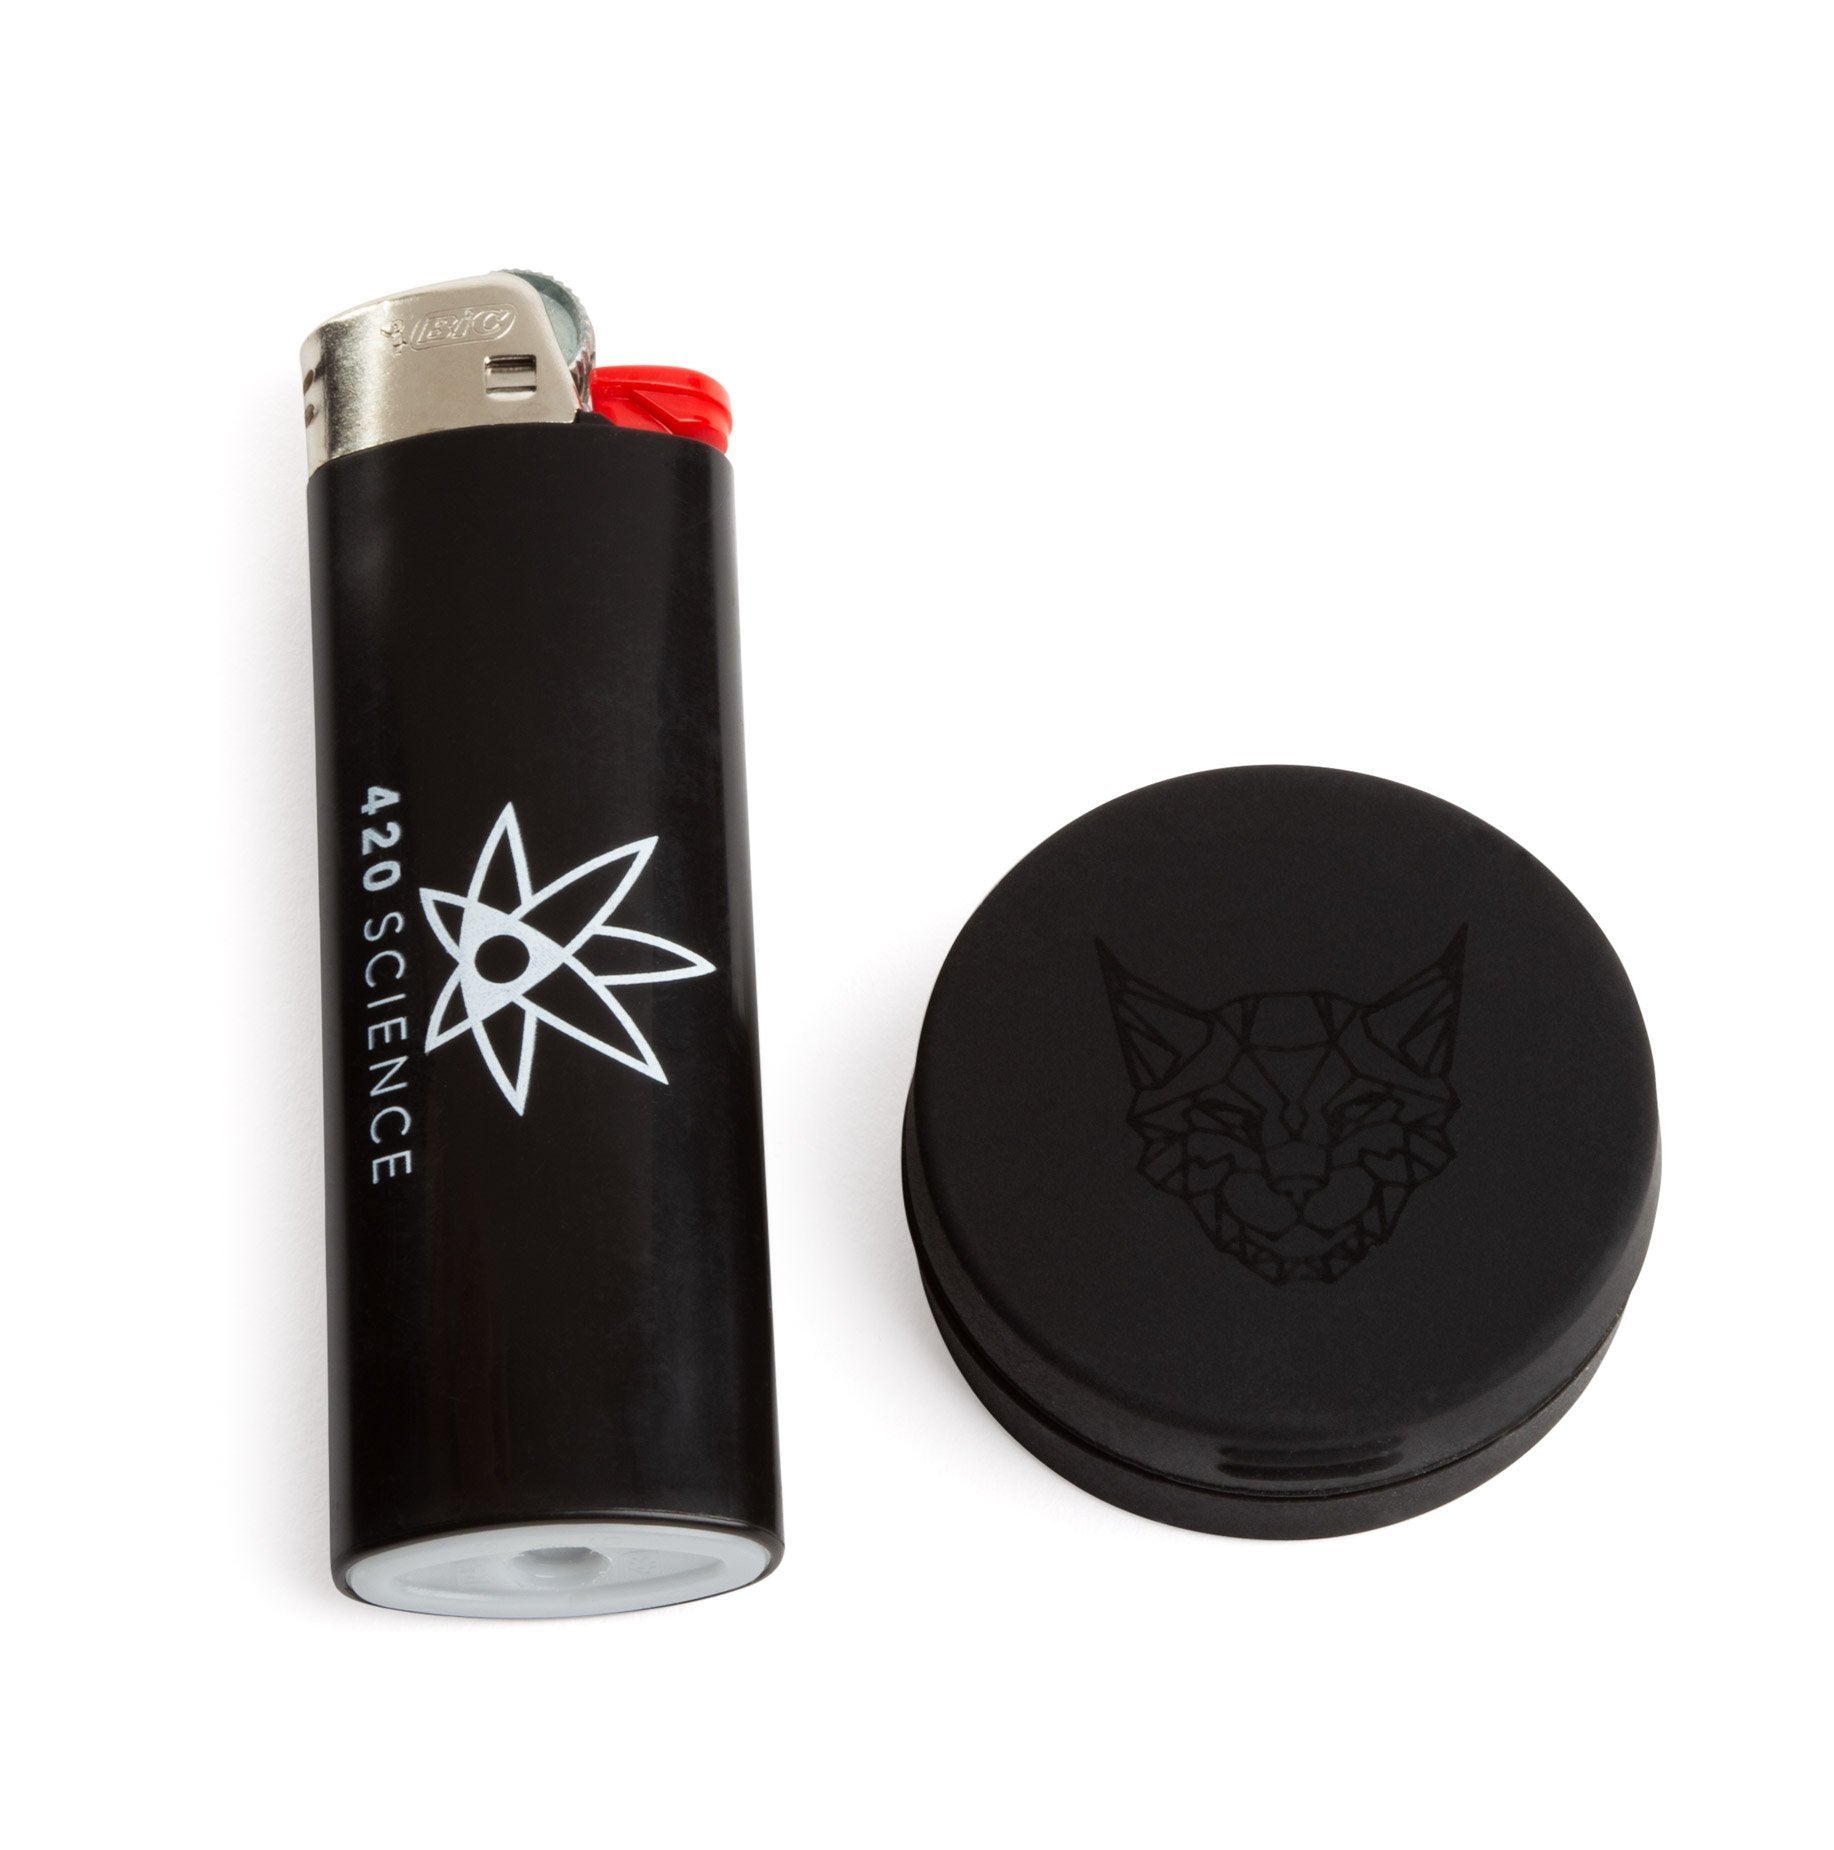 LINX Ceramic Container - 420 Science - The most trusted online smoke shop.